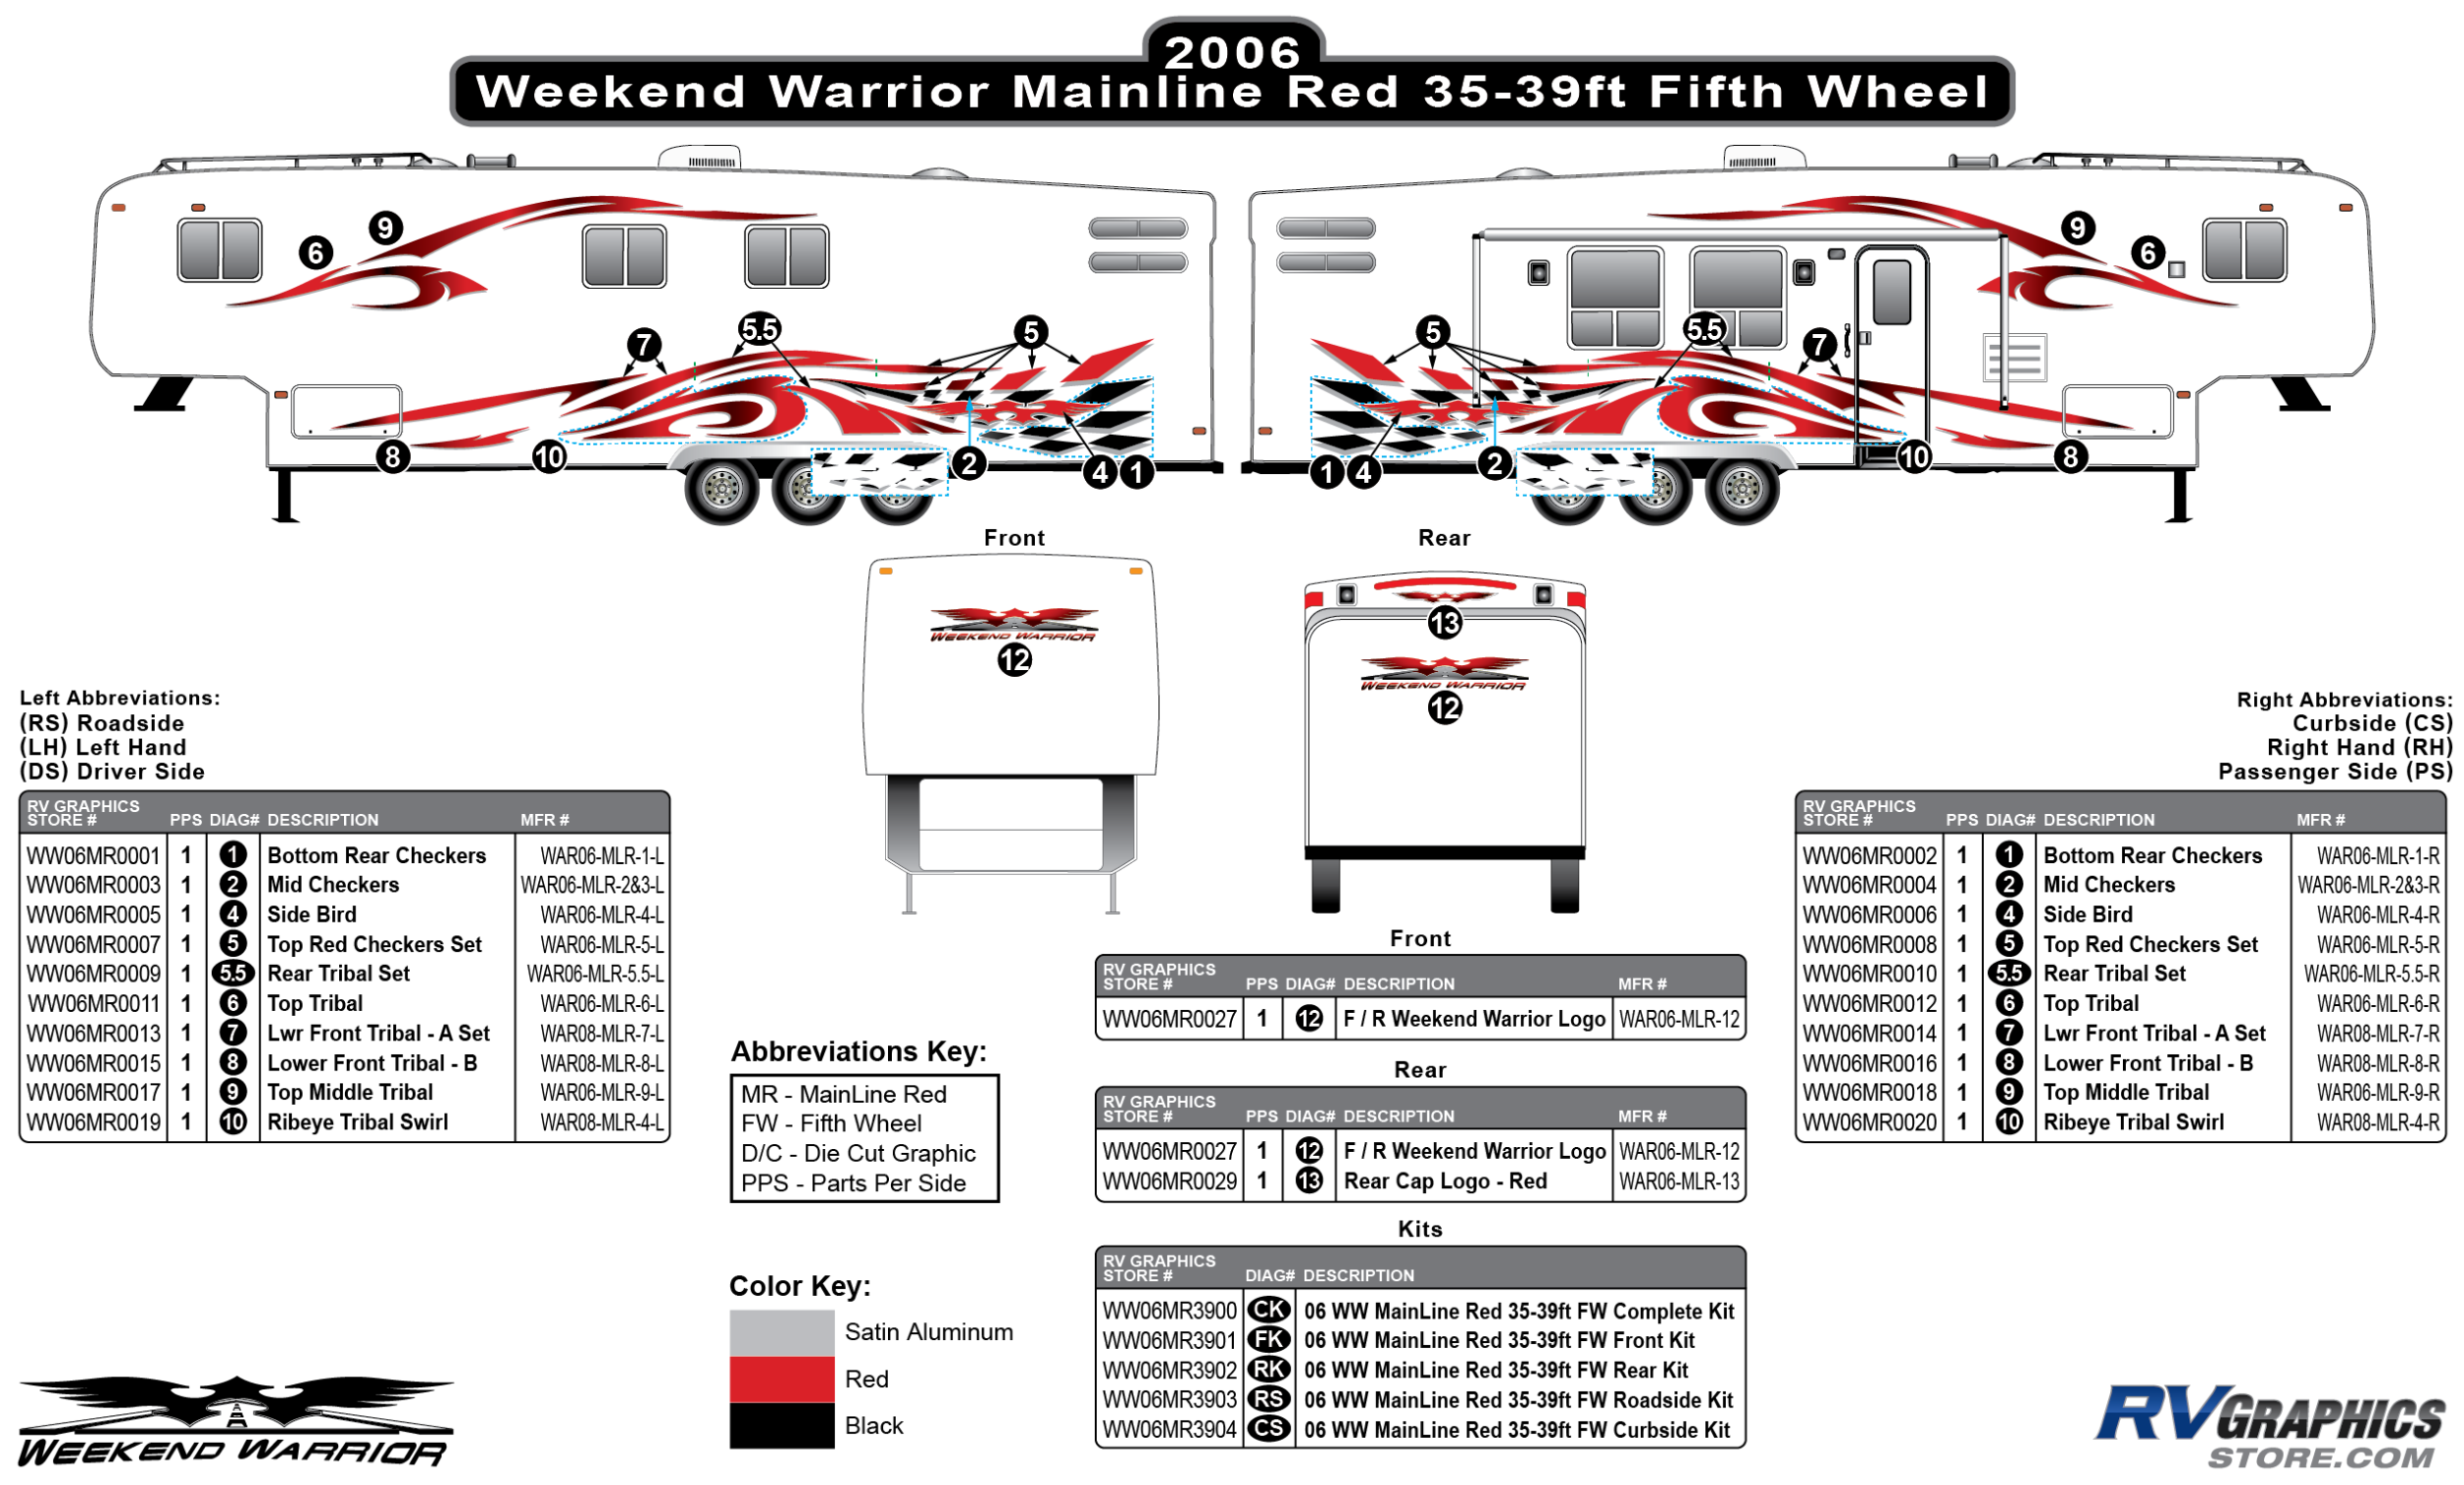 Weekend Warrior Mainline - 2006-2007 Weekend Warrior Mainline FW-35-39' Fifth Wheel Red